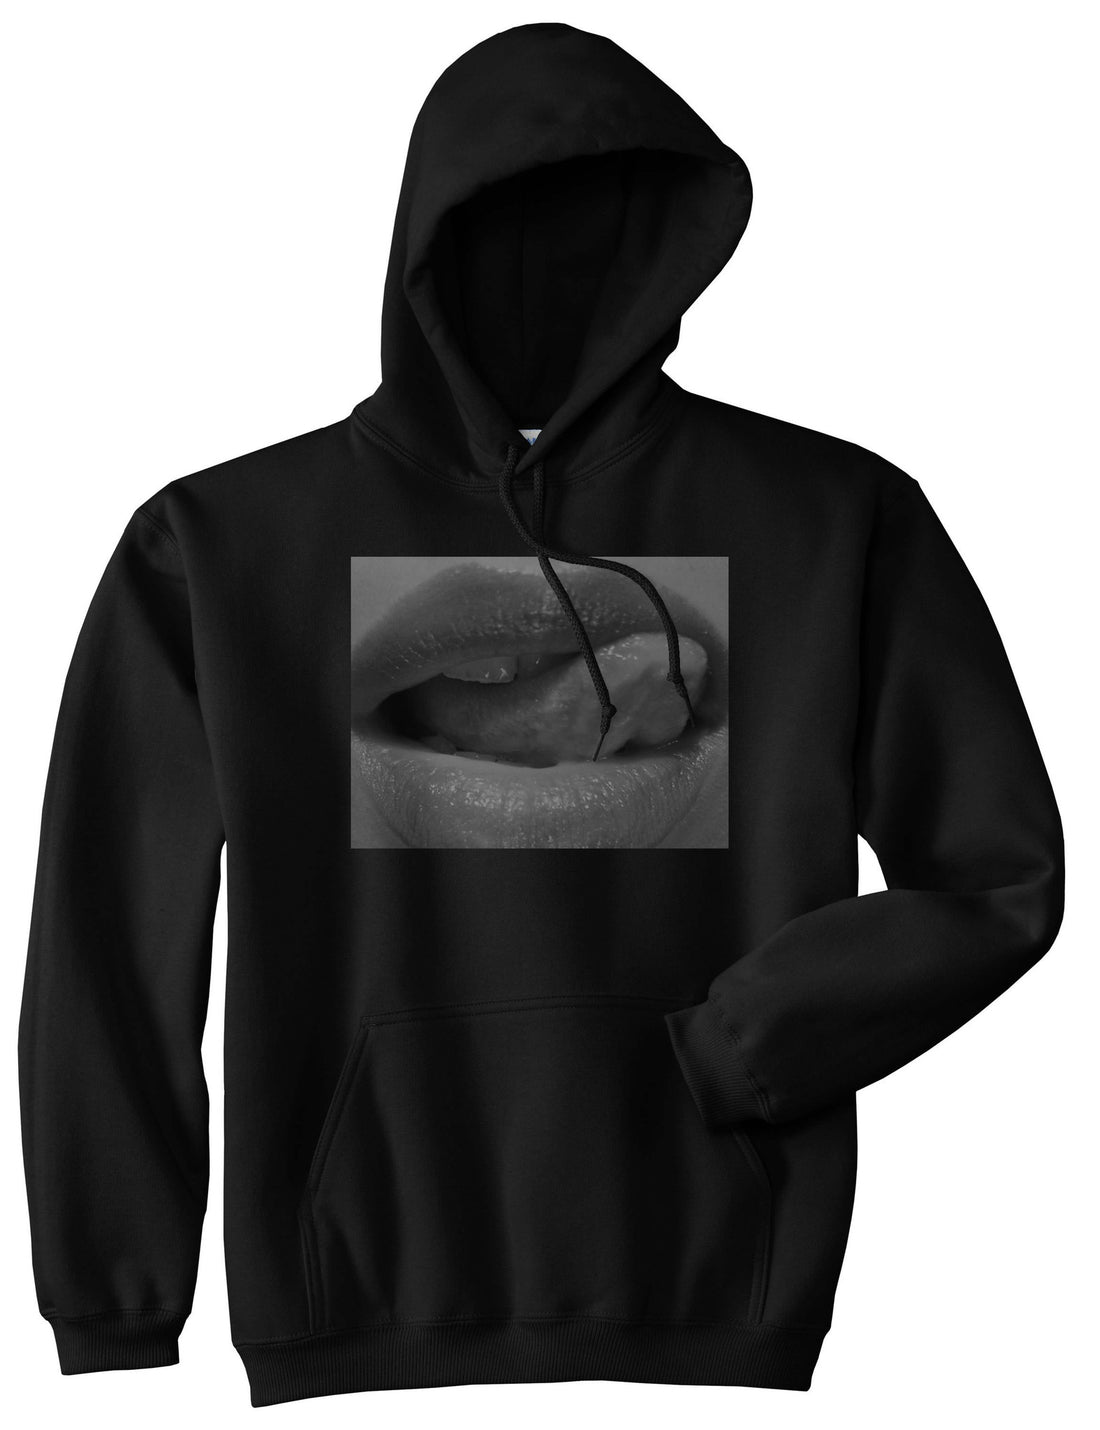 Togue Licking Lips Pullover Hoodie Hoody By Kings Of NY